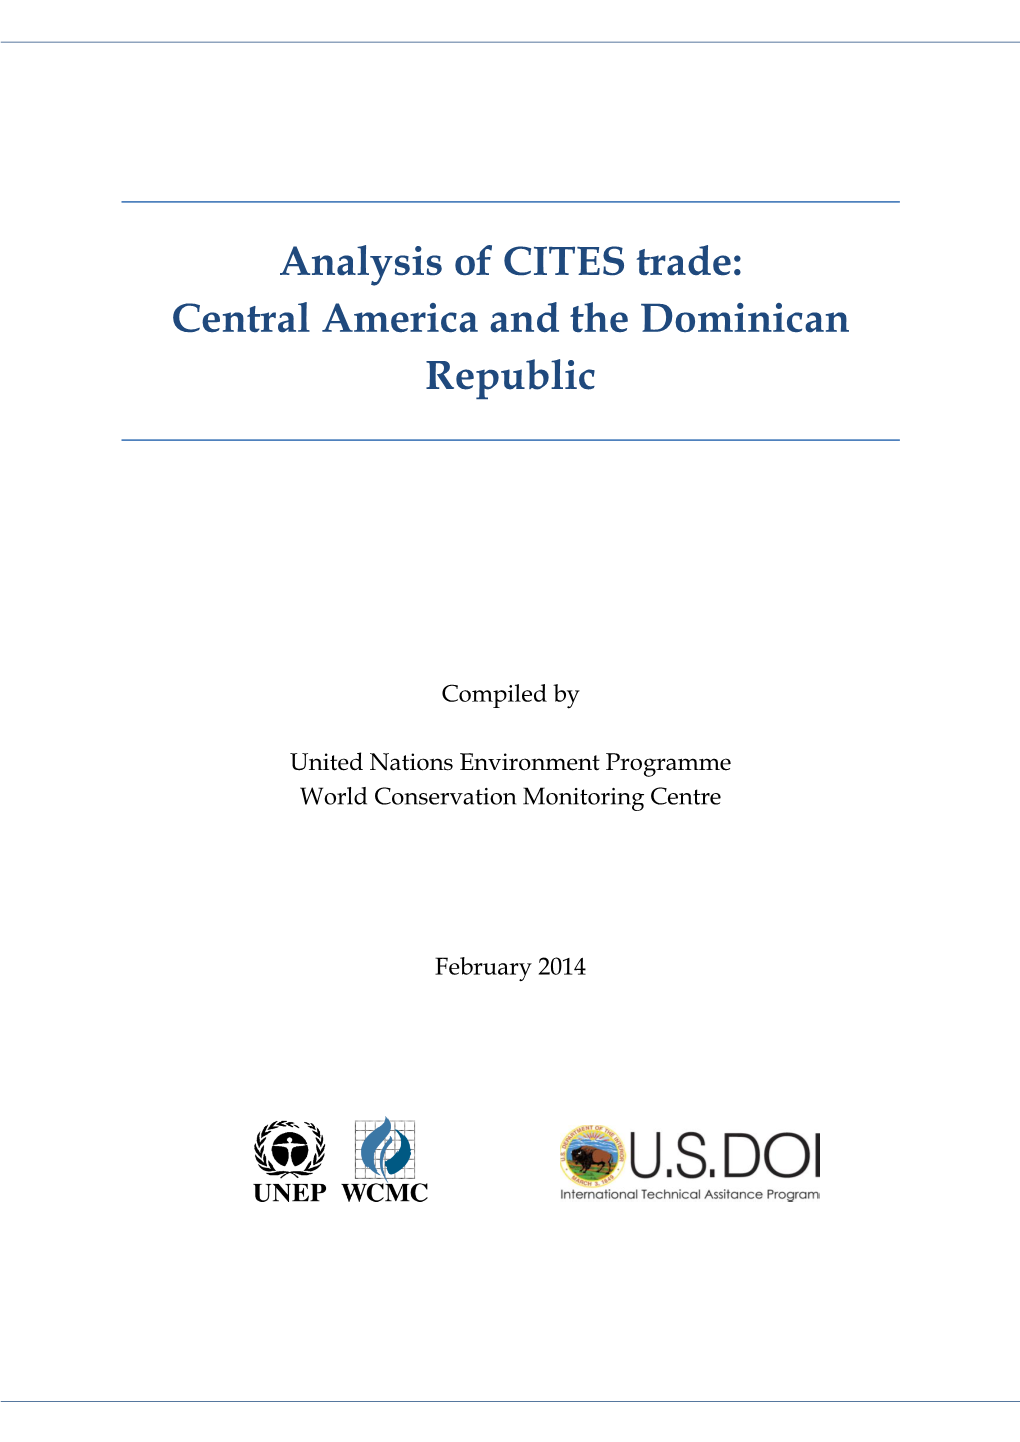 Analysis of CITES Trade: Central America and the Dominican Republic